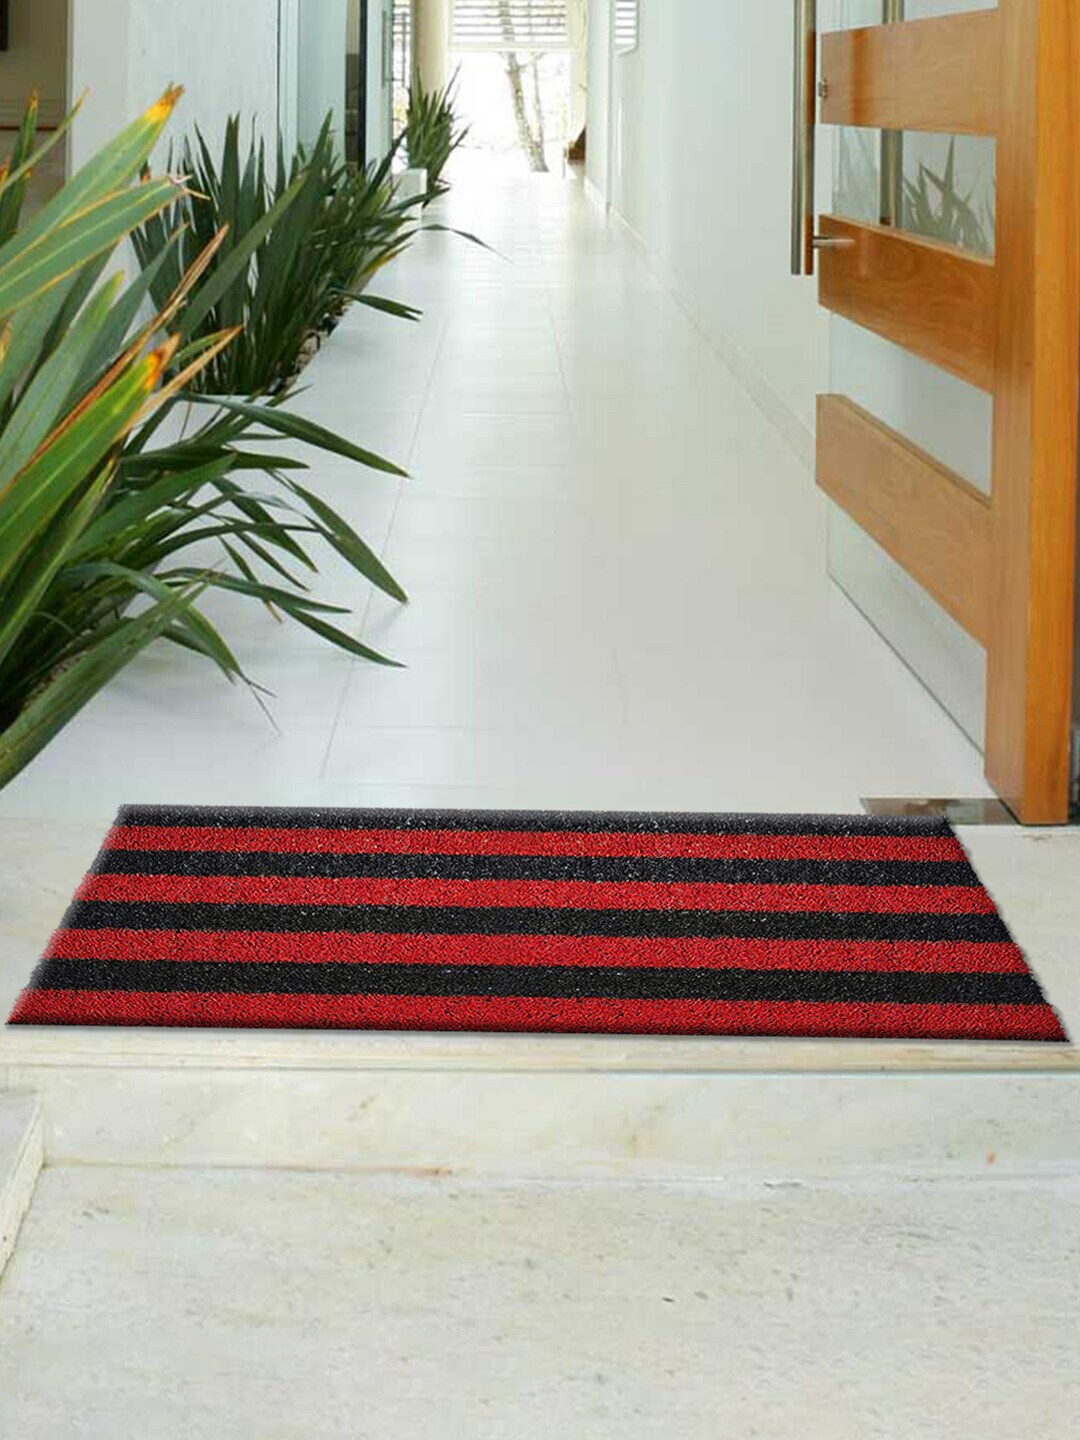 Kuber Industries Red & Black Striped Rubber Doormat Price in India